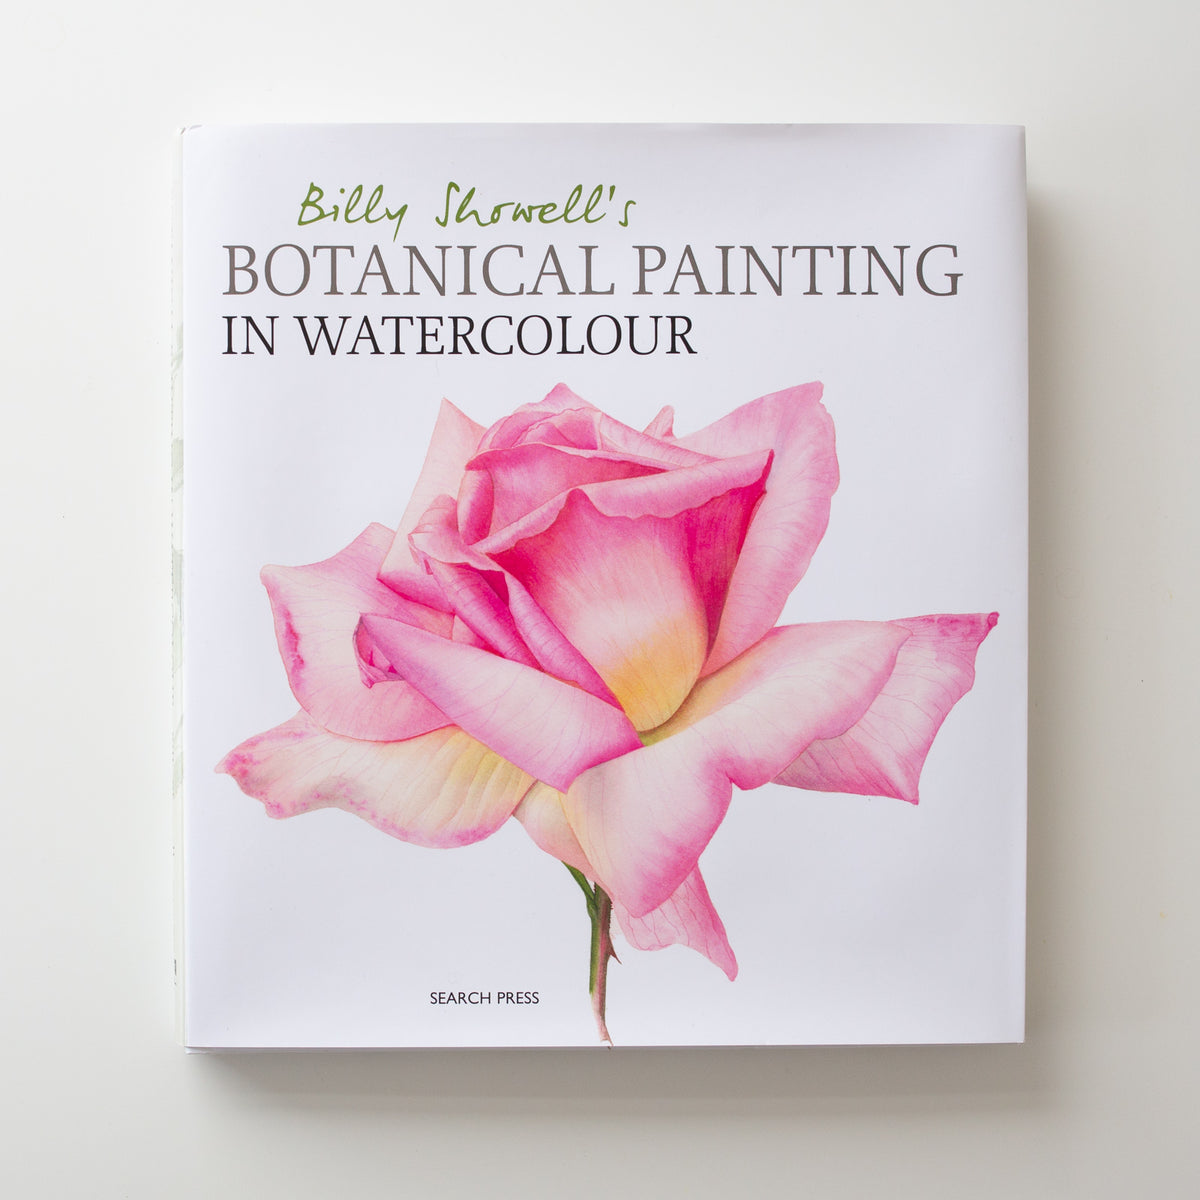 'Botanical Painting in Watercolor' by Billy Howells